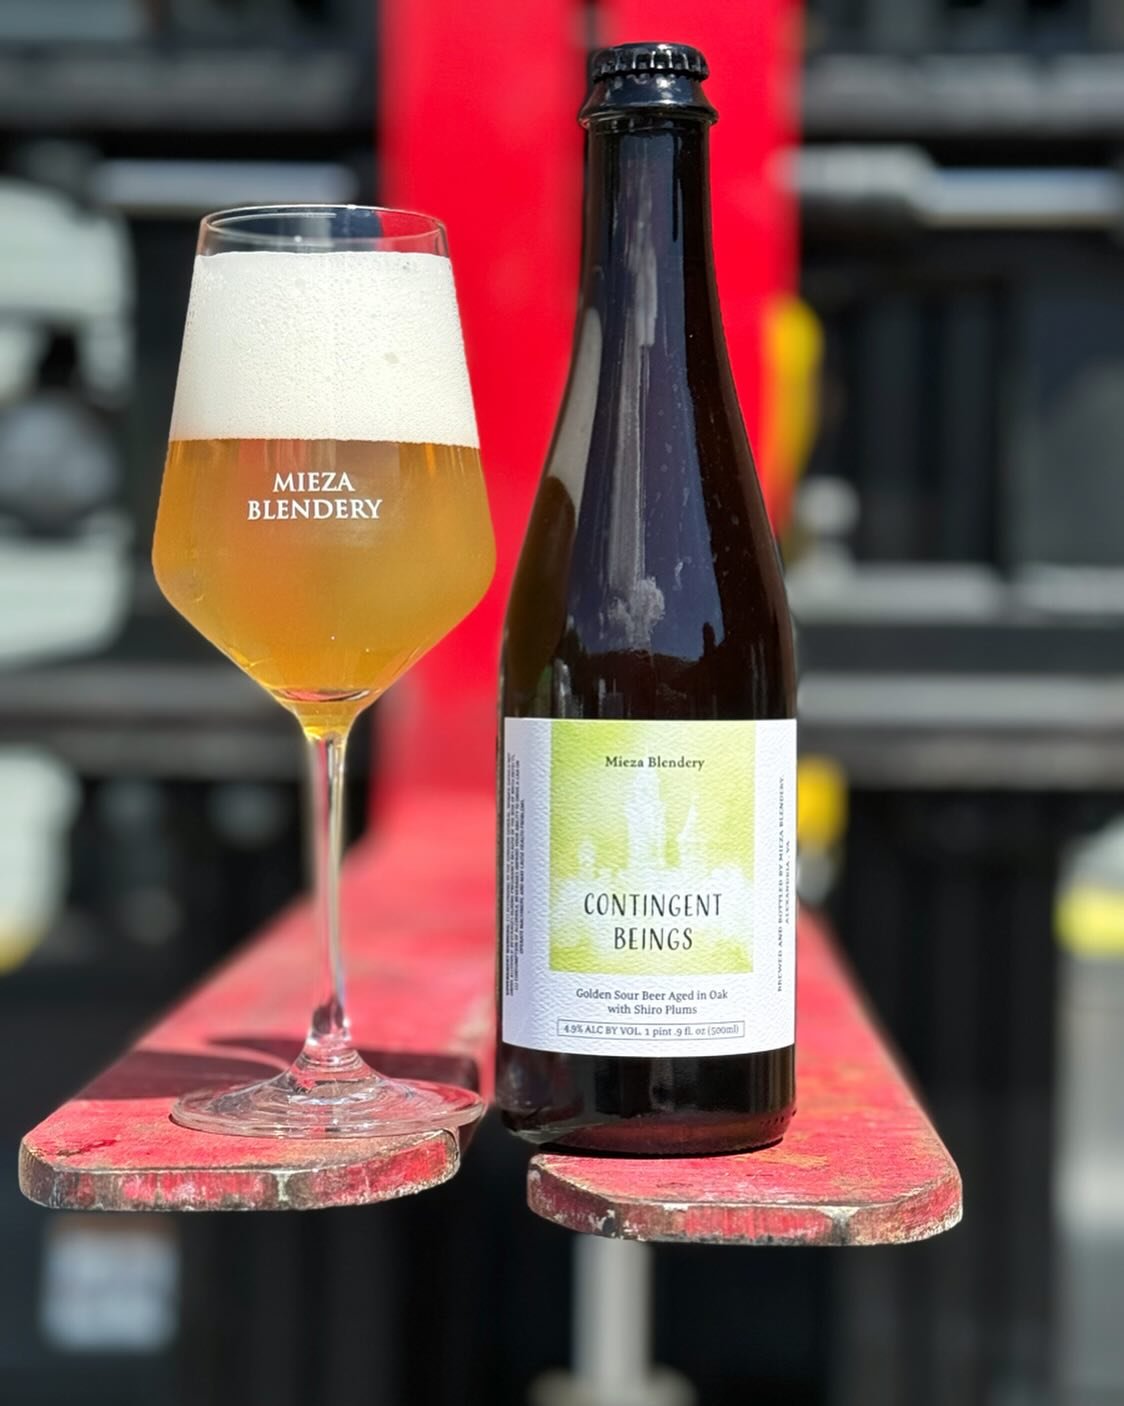 ***New Beer Alert***

Introducing Contingent Beings, a Barrel Aged Blond Blend with Shiro Plums.

The experience includes lilac adjacent floral aromatics and a tannin presence not initially noticeable, but leaves a slightly drying finish as mesmerizi